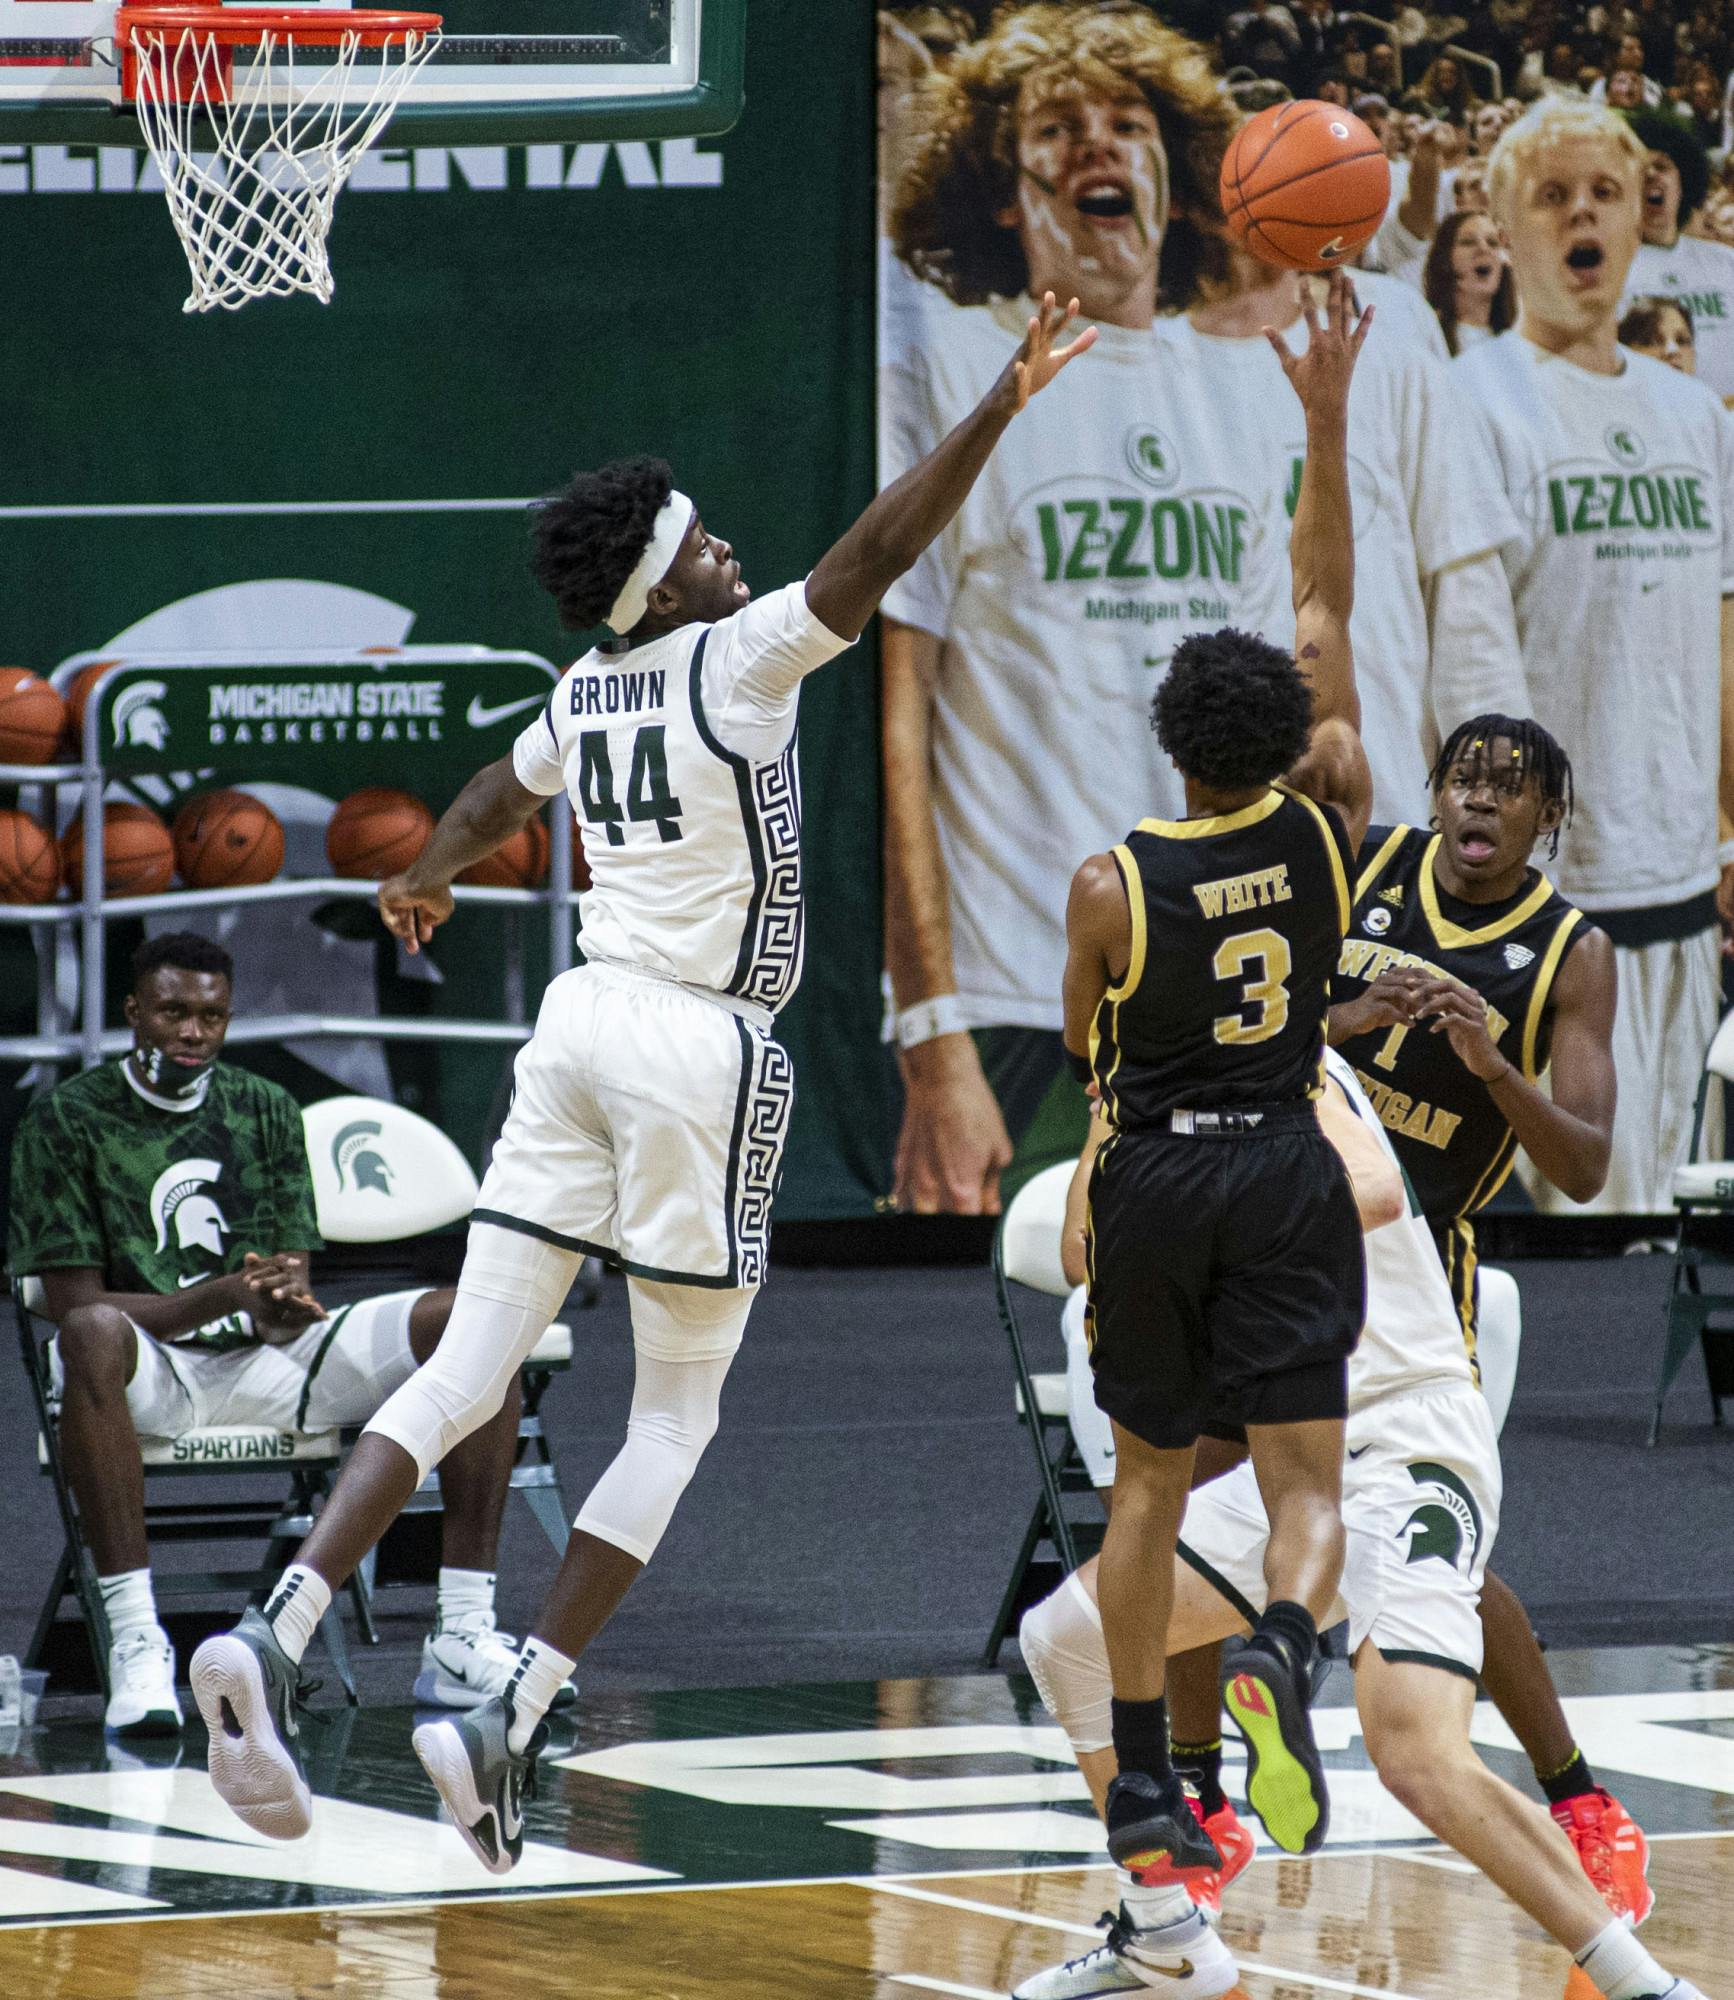 <p>Junior forward Gabe Brown (44) jumps to block a shot from Western Michigan&#x27;s B. Artis White (3) in the first half of the game. The Spartans came back in the second half to end the game against the Broncos, 79-61, on Dec. 6, 2020.</p>